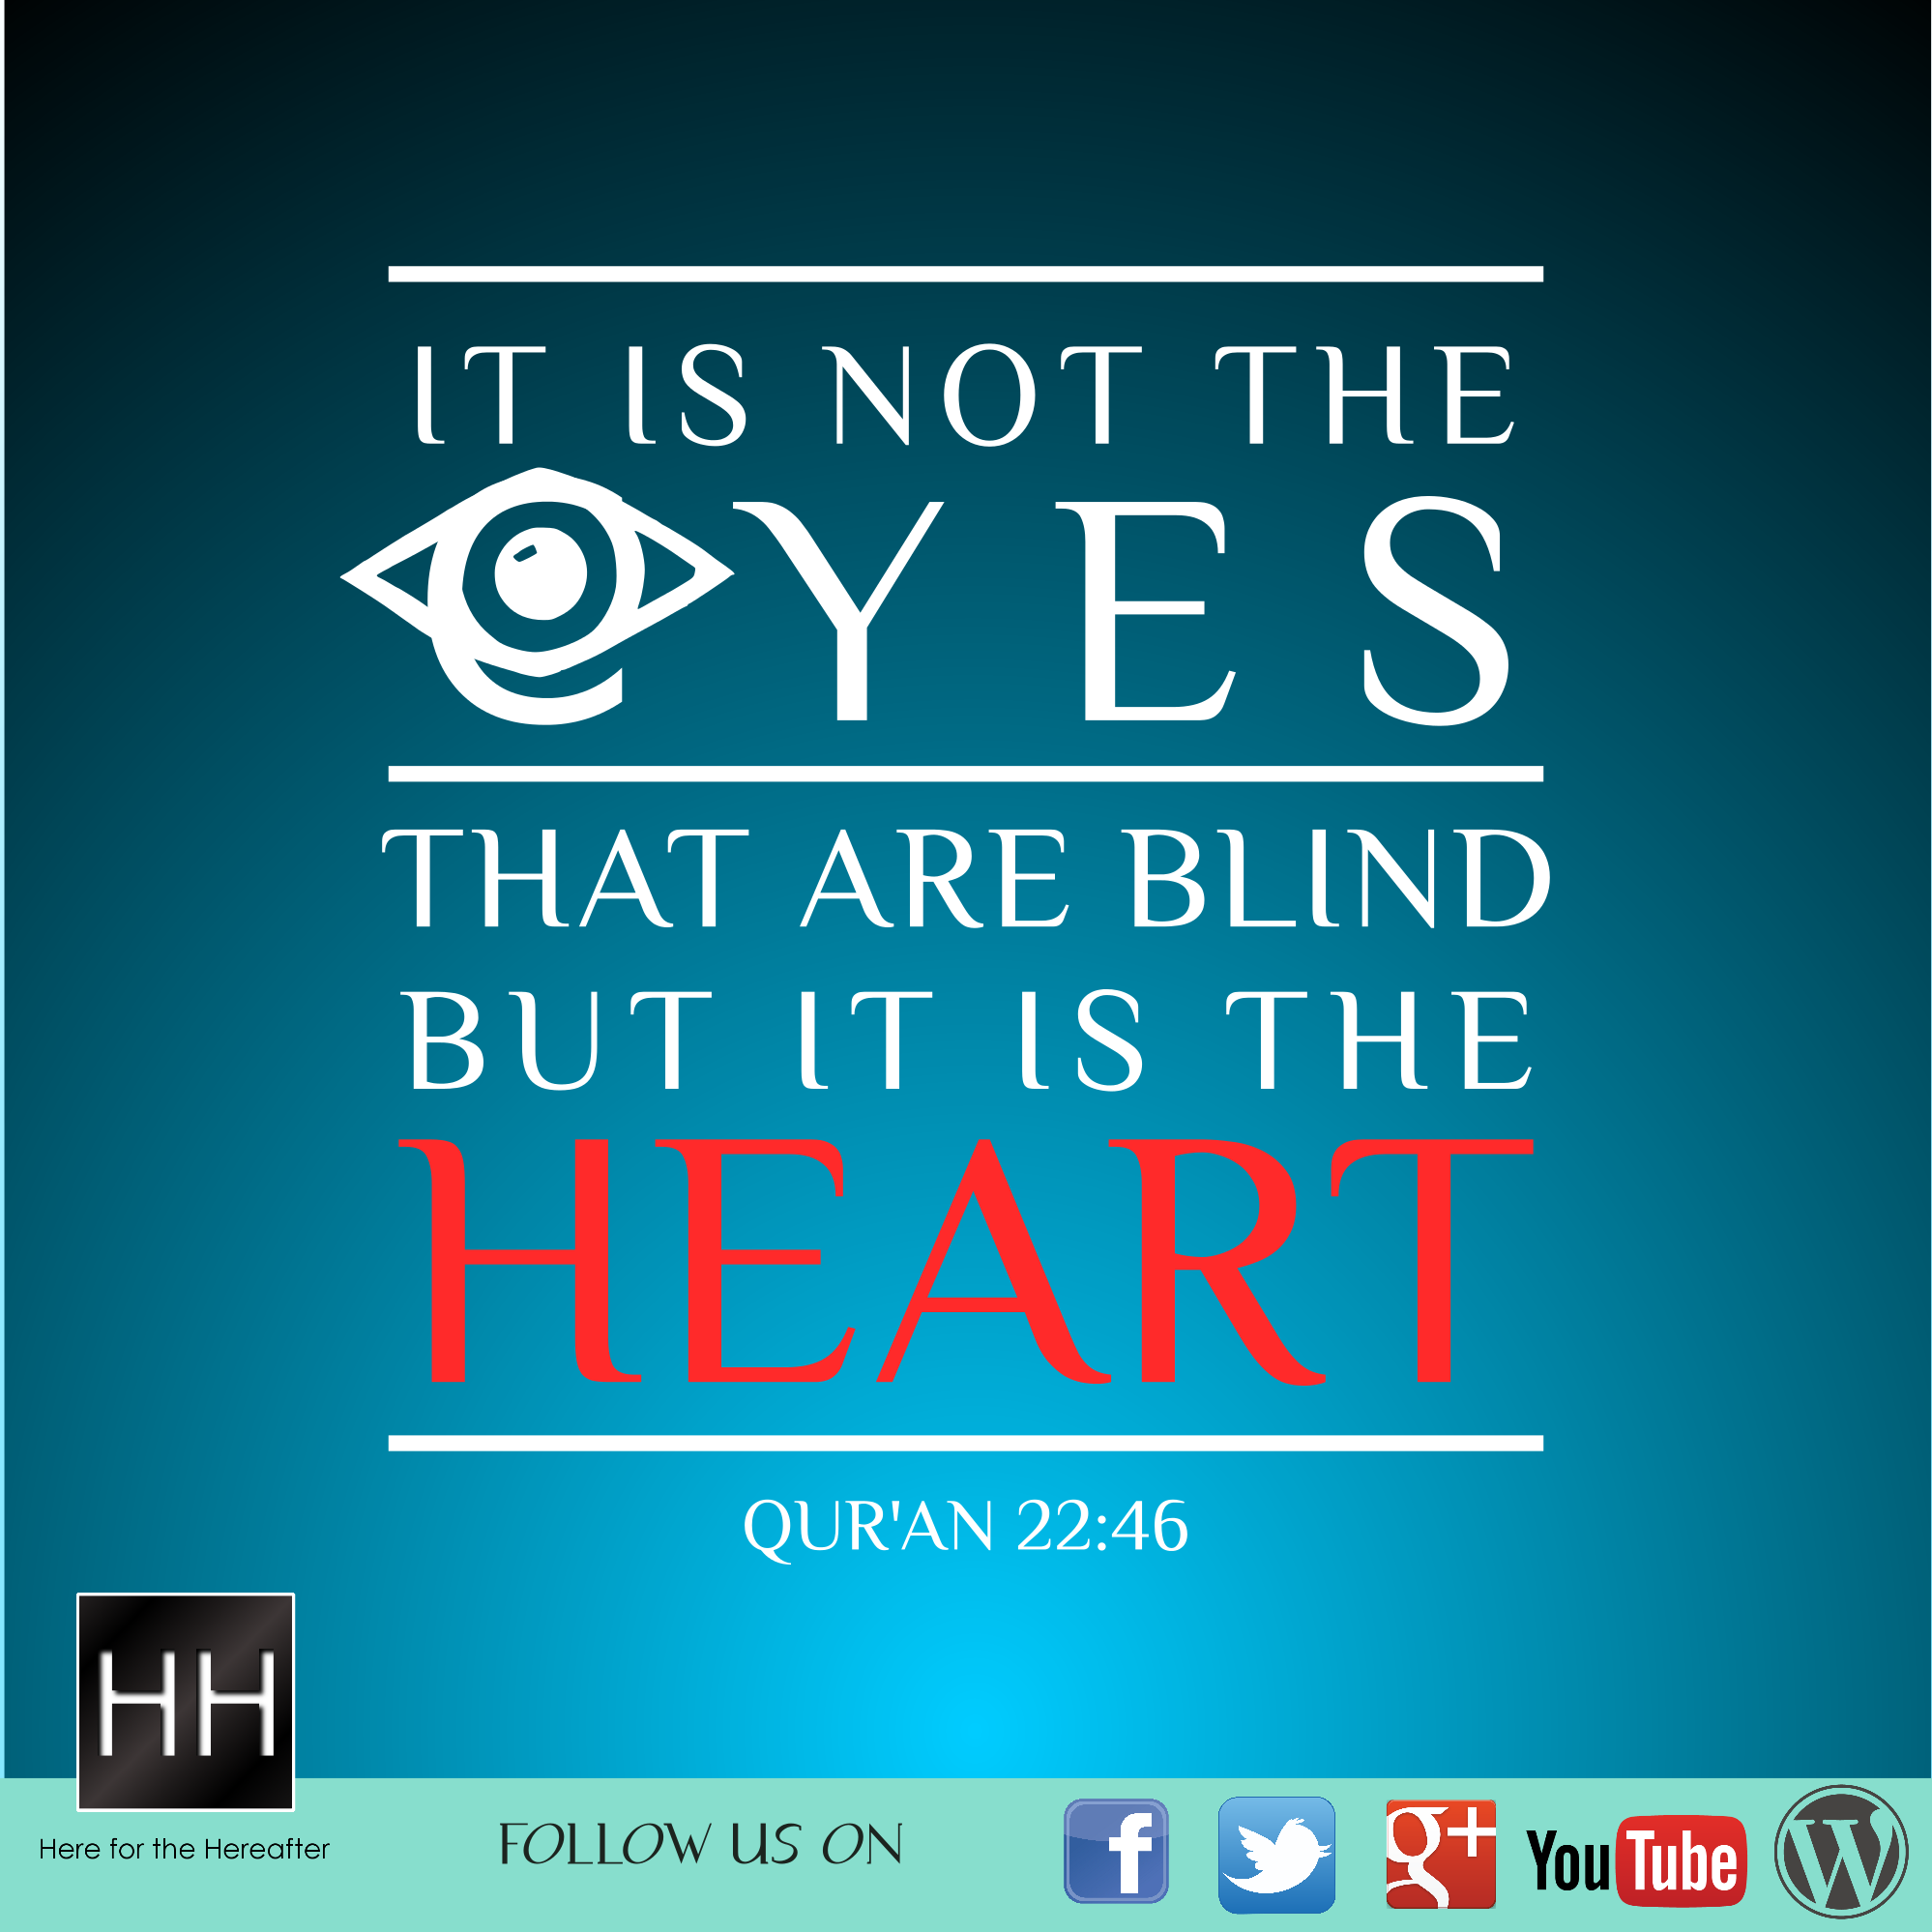 It is not the eyes that are blind but it is the heart.